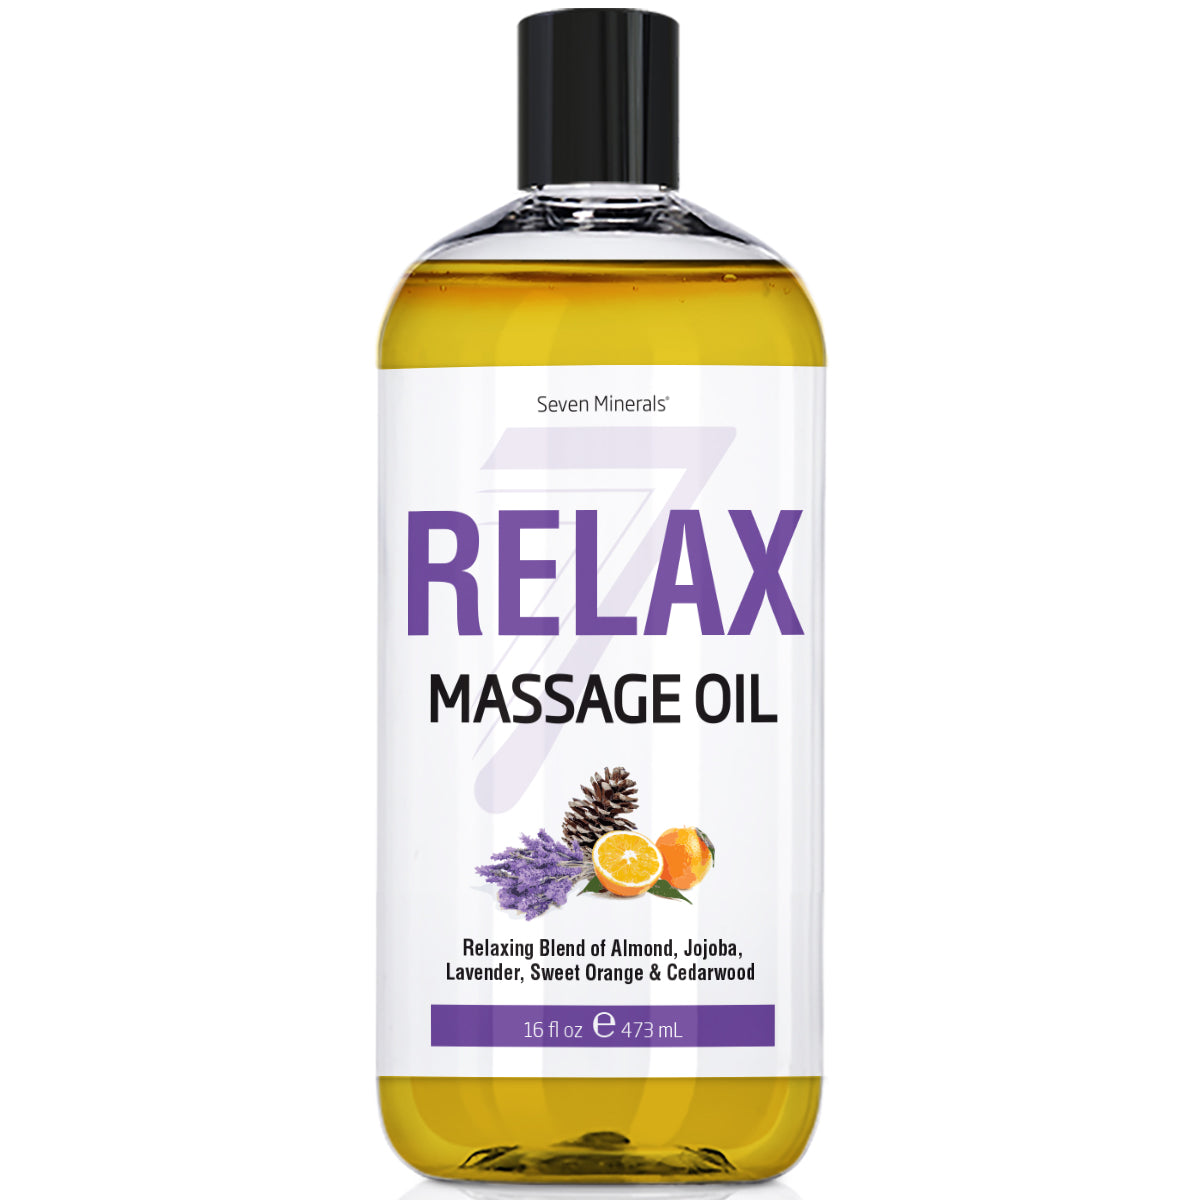 New Relaxing Massage Oil for Massage Therapy - Big 16oz Bottle - Ideal for Professional or at-Home Body Massage. Soothing Natural Blend of Almond, Jojoba, Lavender, Sweet Orange & Cedarwood